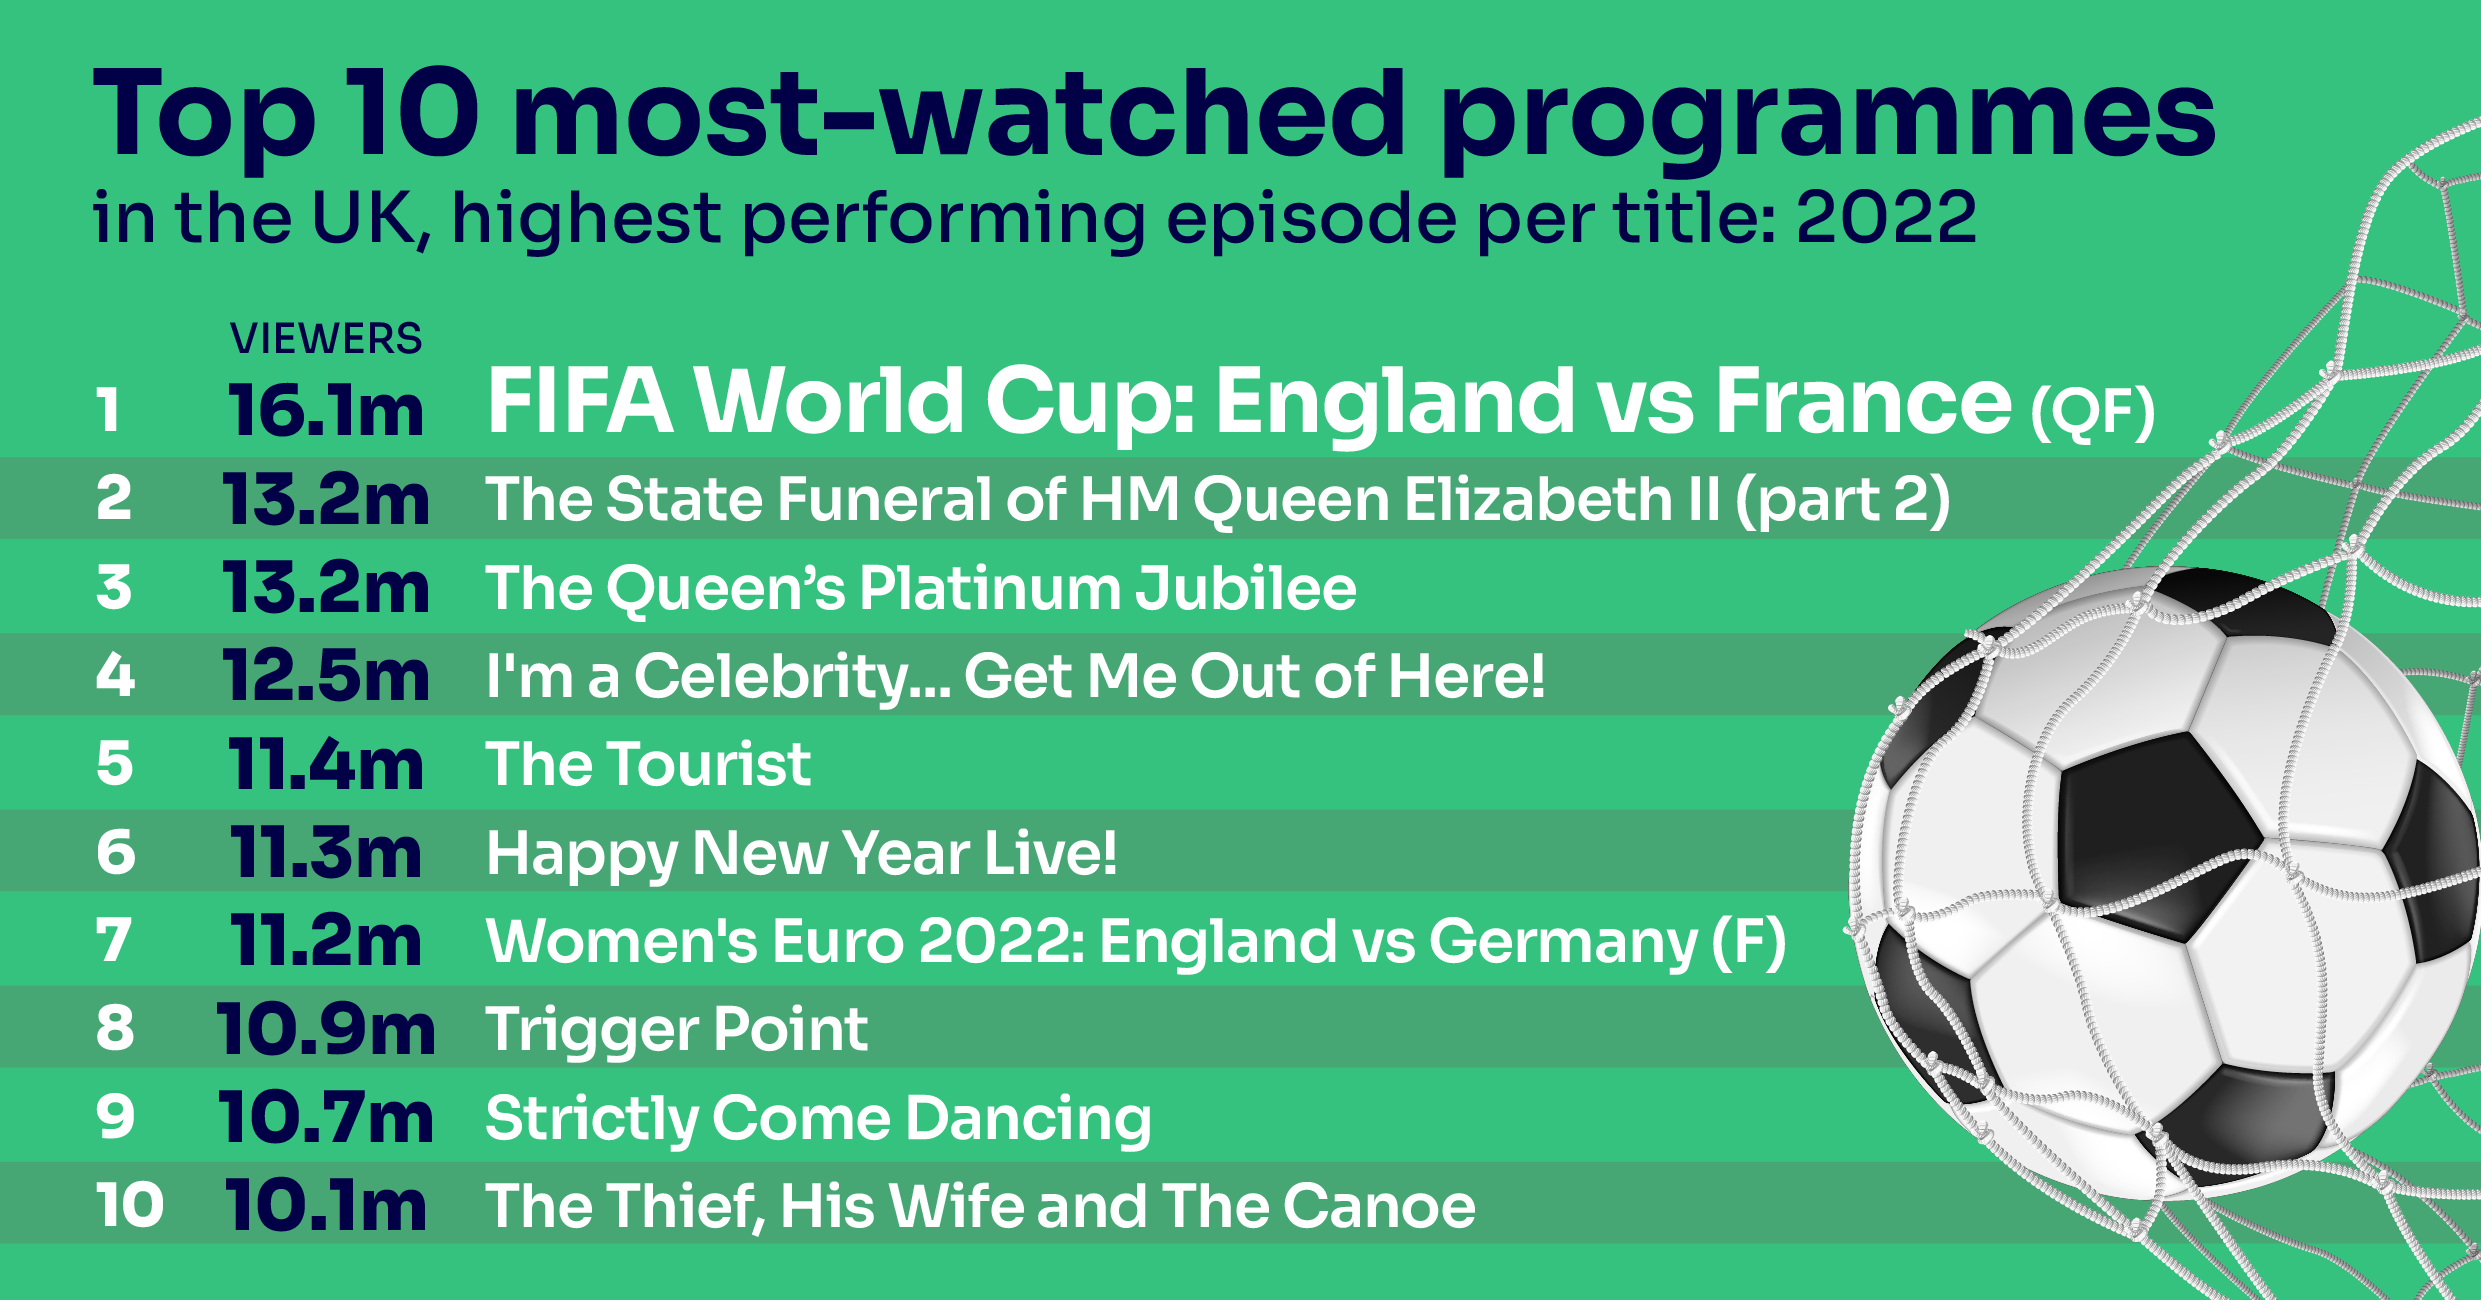 Top 10 most watched programmes in the UK